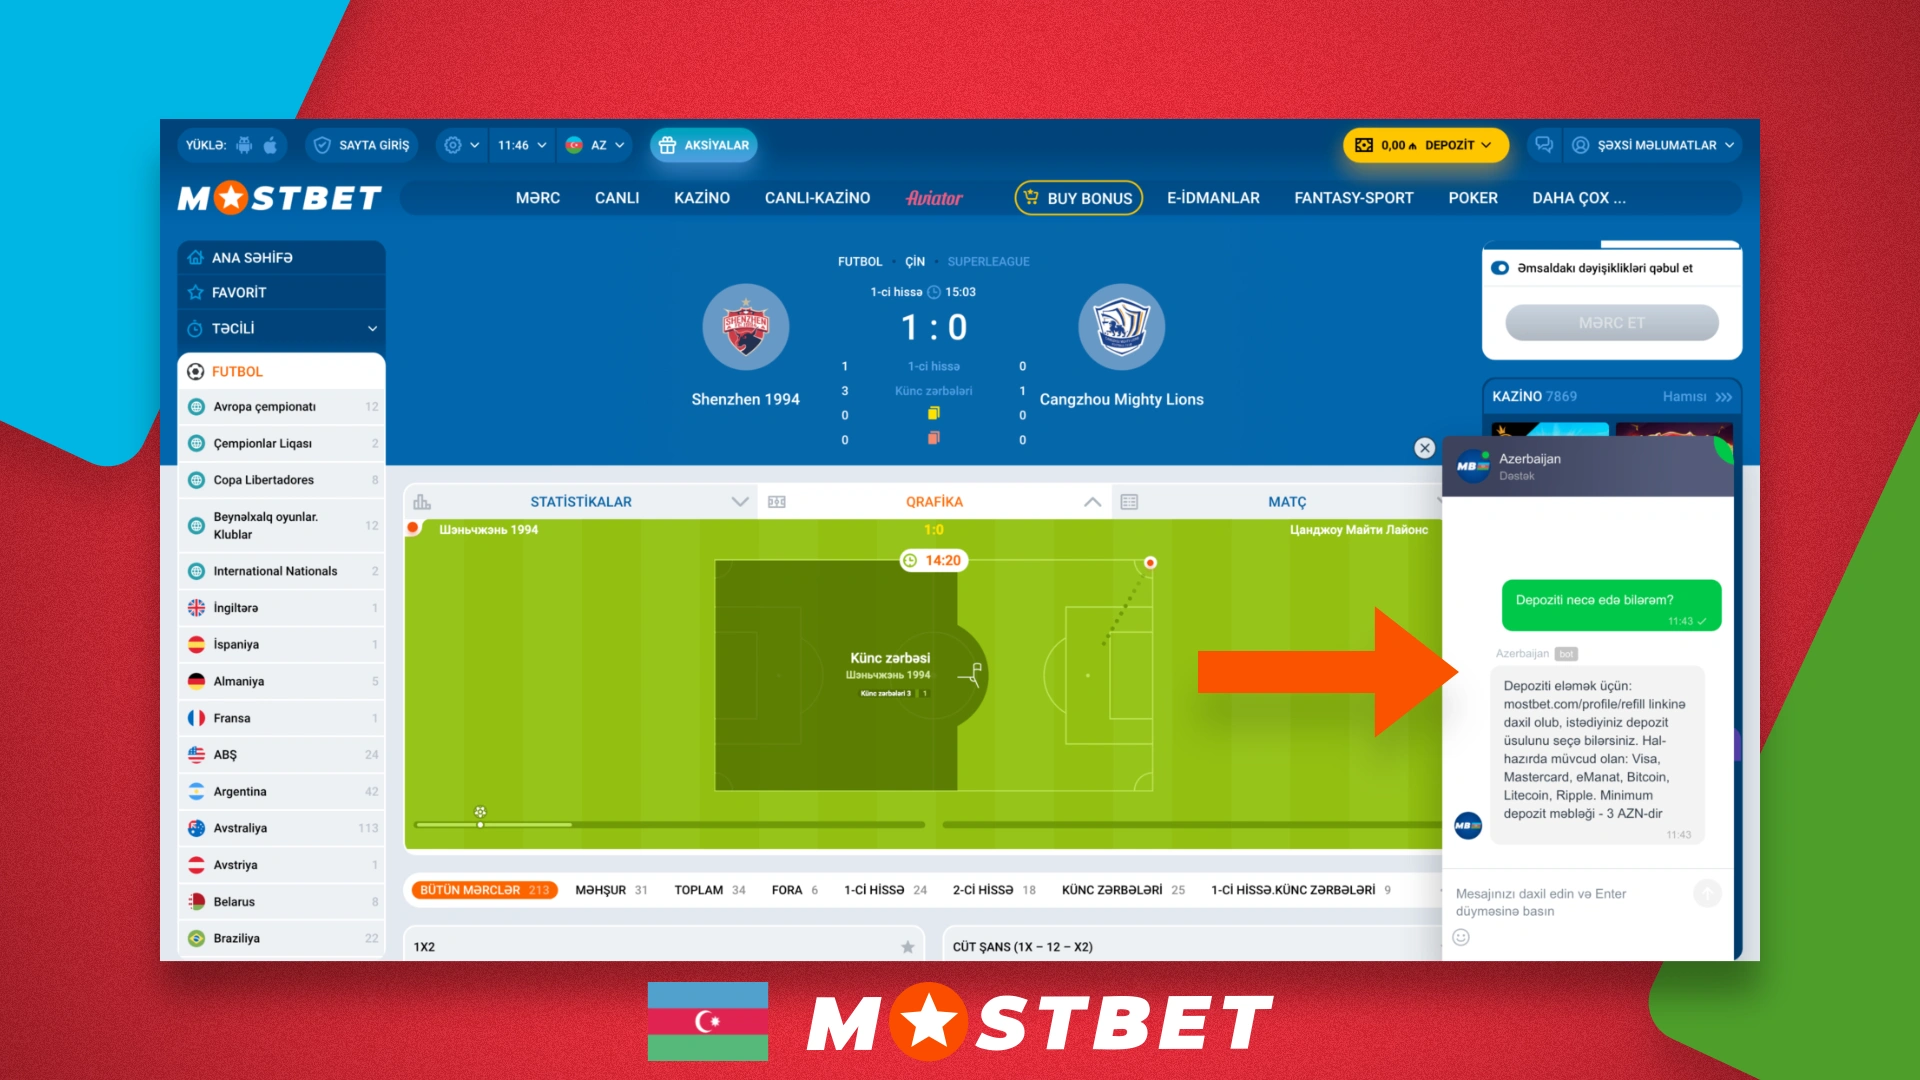 Online chat customer support Mostbet